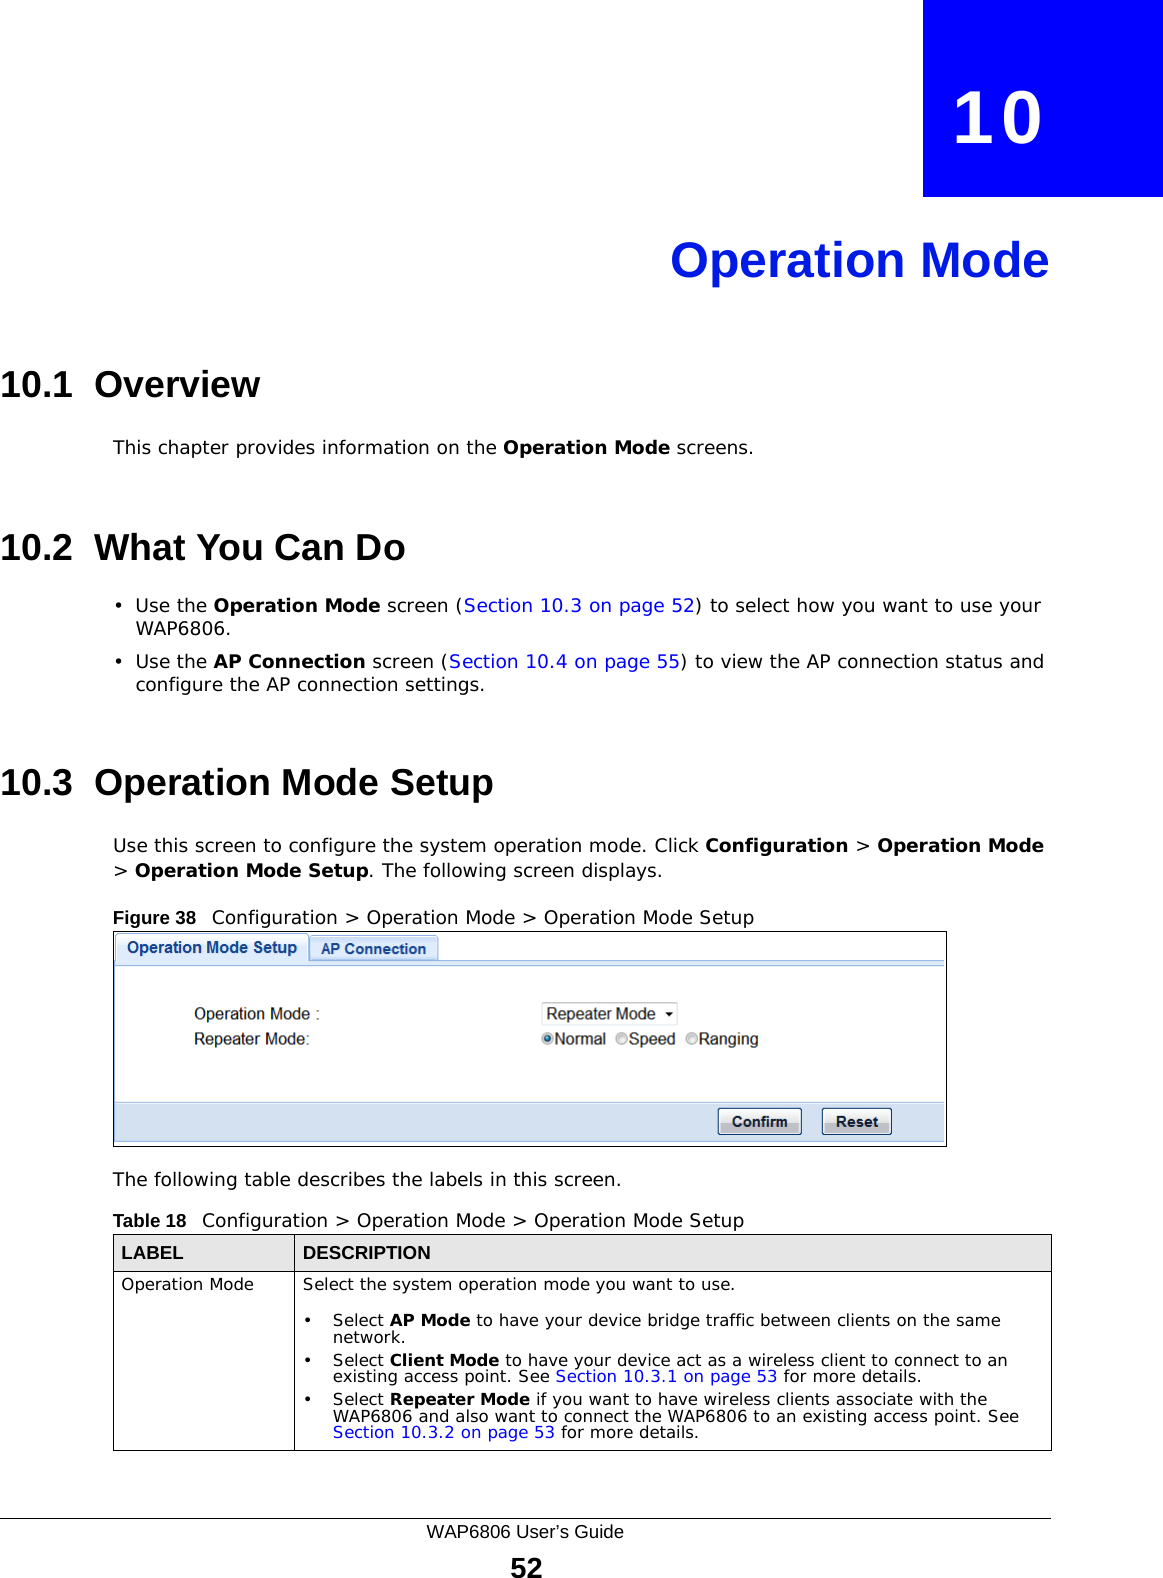 WAP6806 User’s Guide52CHAPTER   10Operation Mode10.1  OverviewThis chapter provides information on the Operation Mode screens. 10.2  What You Can Do•Use the Operation Mode screen (Section 10.3 on page 52) to select how you want to use your WAP6806. •Use the AP Connection screen (Section 10.4 on page 55) to view the AP connection status and configure the AP connection settings.10.3  Operation Mode SetupUse this screen to configure the system operation mode. Click Configuration &gt; Operation Mode &gt; Operation Mode Setup. The following screen displays.Figure 38   Configuration &gt; Operation Mode &gt; Operation Mode Setup The following table describes the labels in this screen. Table 18   Configuration &gt; Operation Mode &gt; Operation Mode SetupLABEL DESCRIPTIONOperation Mode Select the system operation mode you want to use.• Select AP Mode to have your device bridge traffic between clients on the same network.• Select Client Mode to have your device act as a wireless client to connect to an existing access point. See Section 10.3.1 on page 53 for more details.• Select Repeater Mode if you want to have wireless clients associate with the WAP6806 and also want to connect the WAP6806 to an existing access point. See Section 10.3.2 on page 53 for more details.